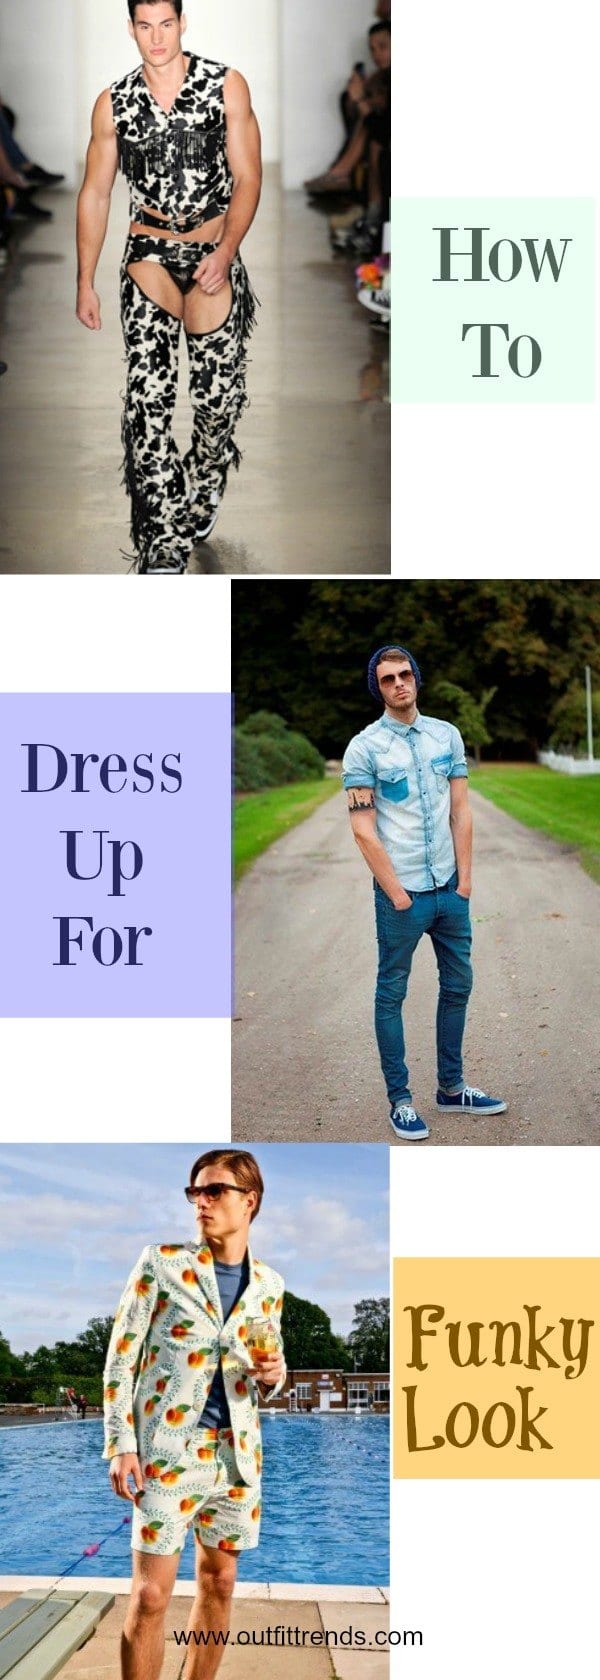 Funky Outfits For Guys–16 Ideas what to wear for Funky Look